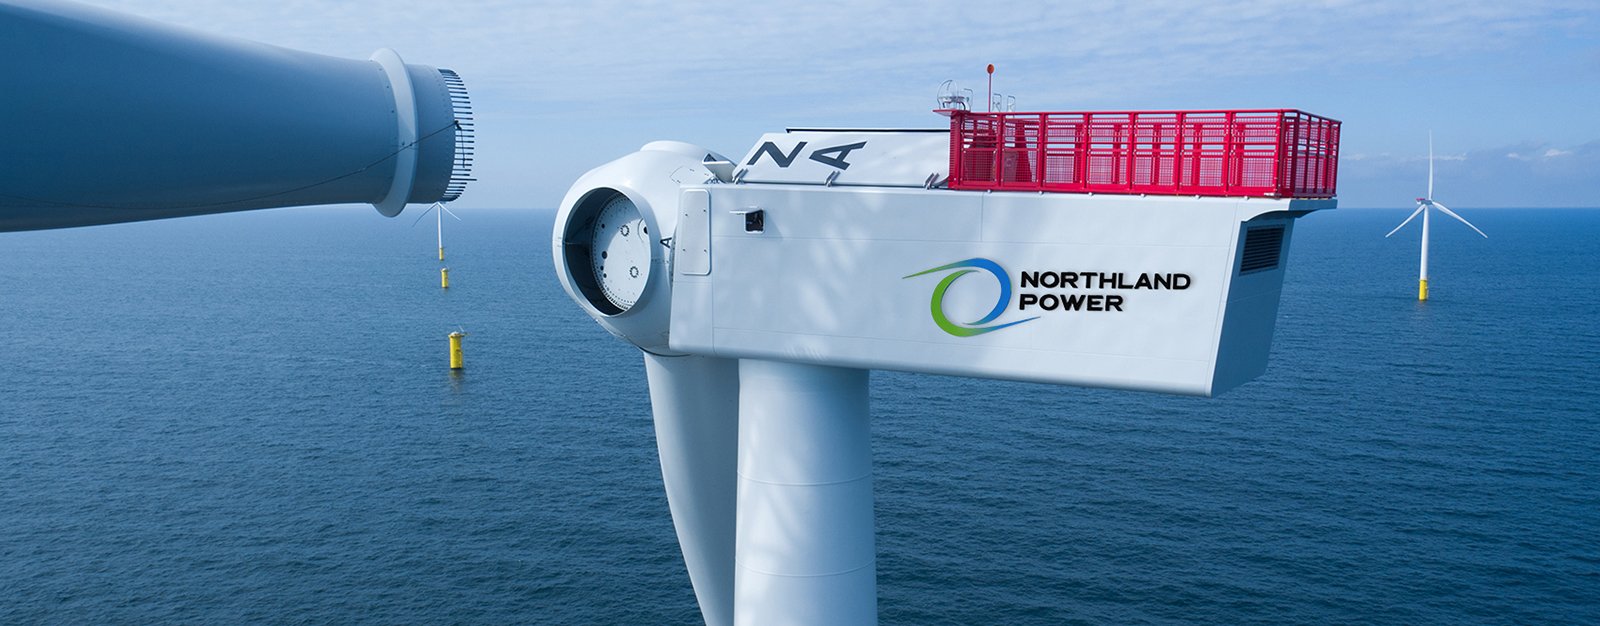 Northland Power launches new brand, reinforcing commitment to building a  sustainable future - Northland Power